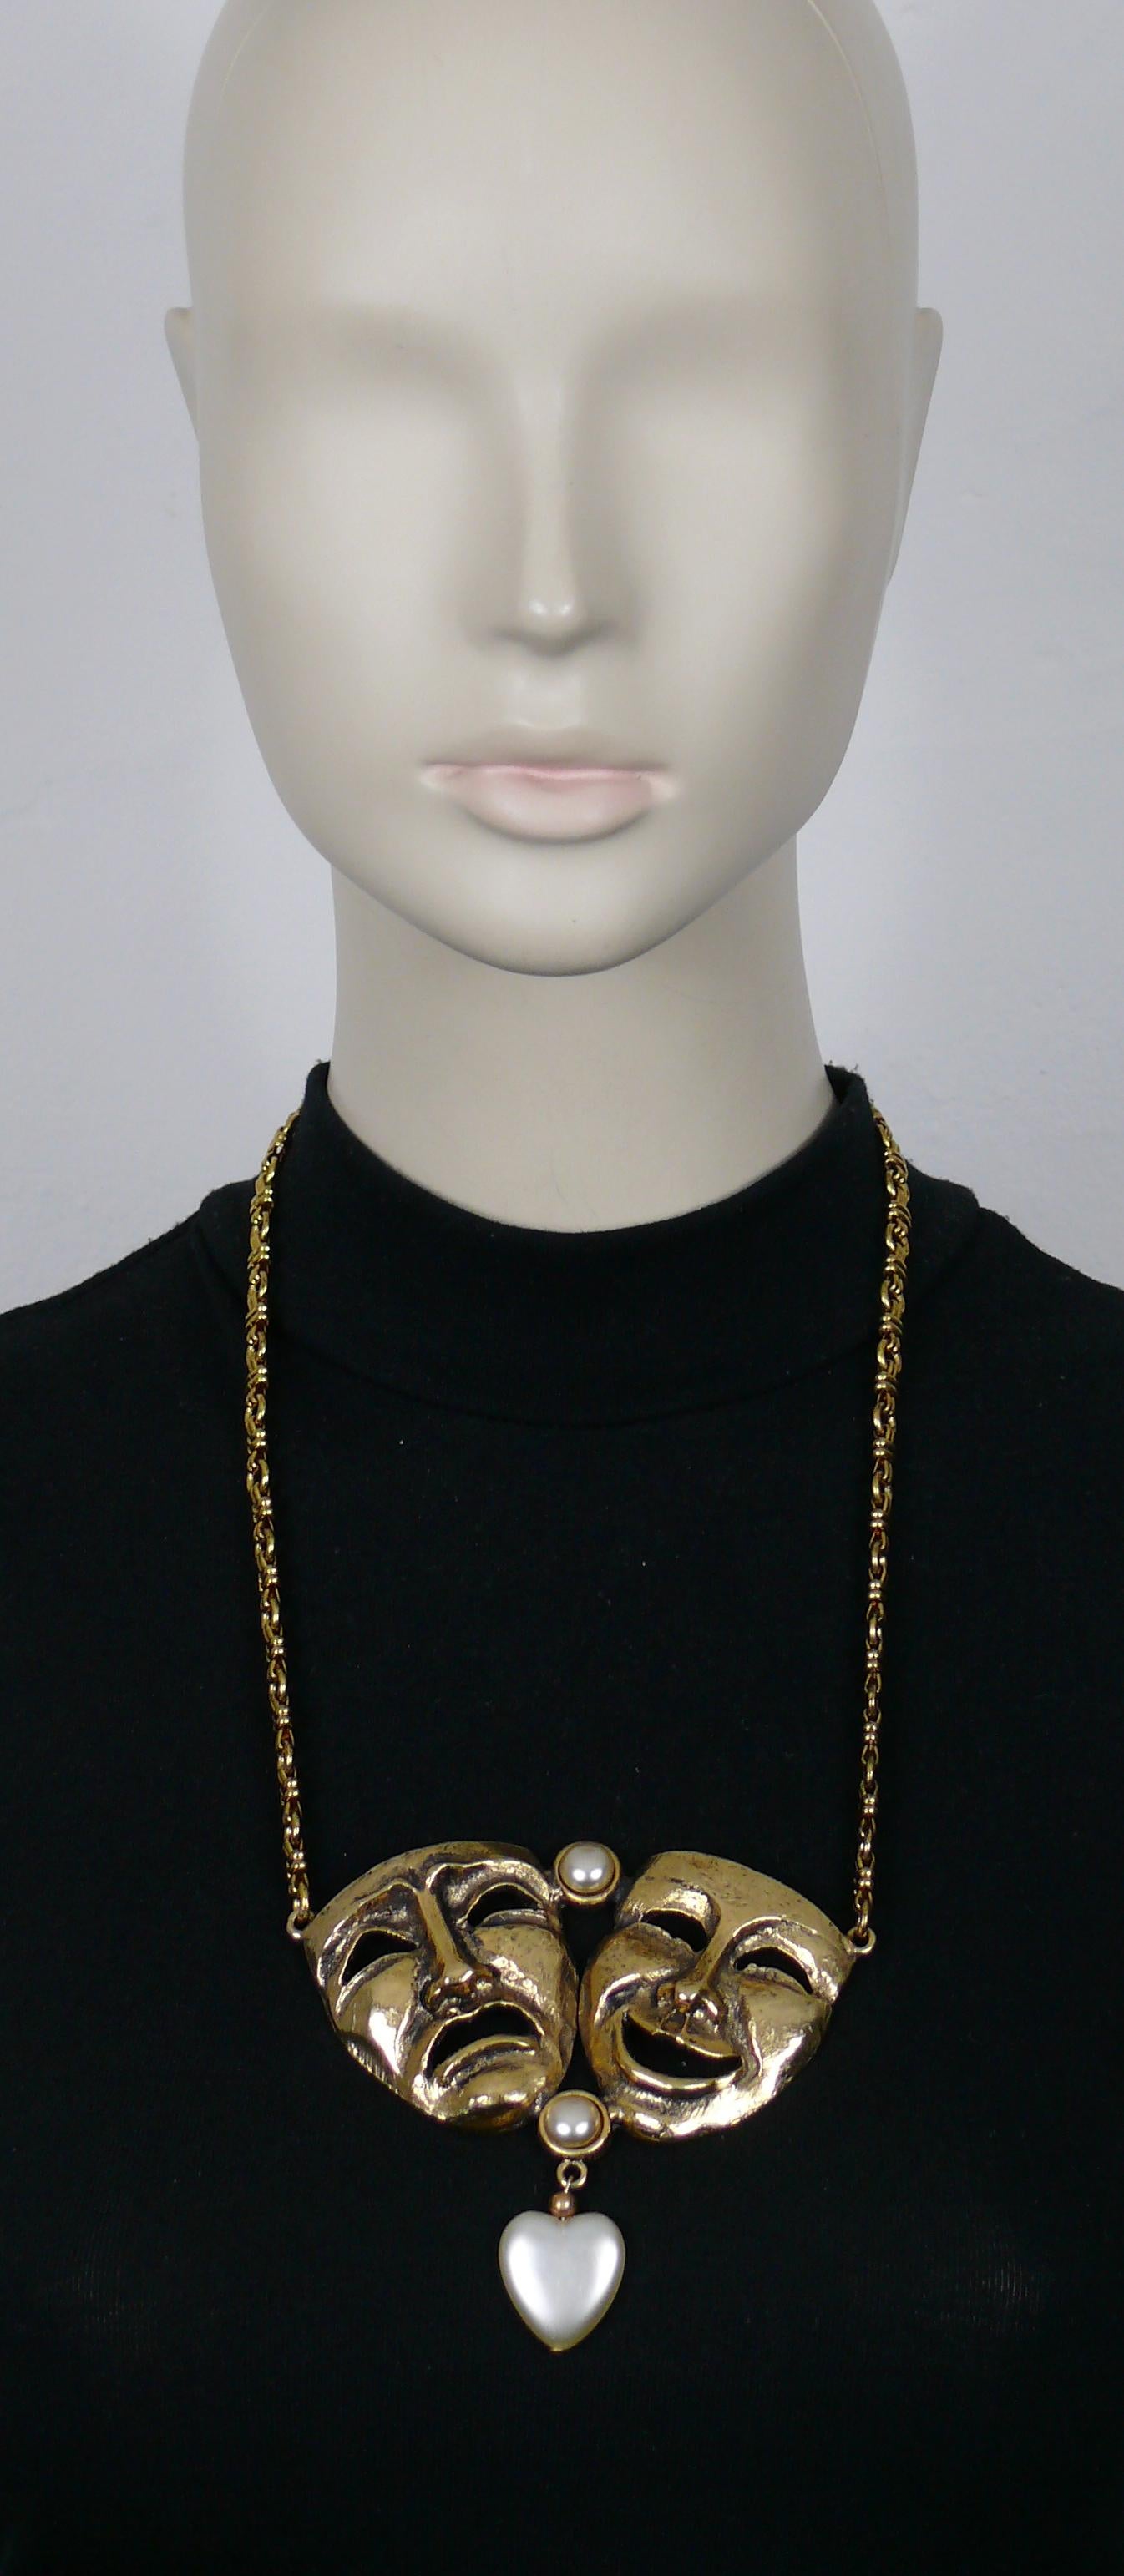 MOSCHINO vintage chain necklace featuring an antiqued gold tone comedy tragedy mask pendant embellished with faux pearls and a heart charm.

Spring clasp closure.

Embossed MOSCHINO.

Indicative measurement : length approx. 62 cm (24.41 inches) /